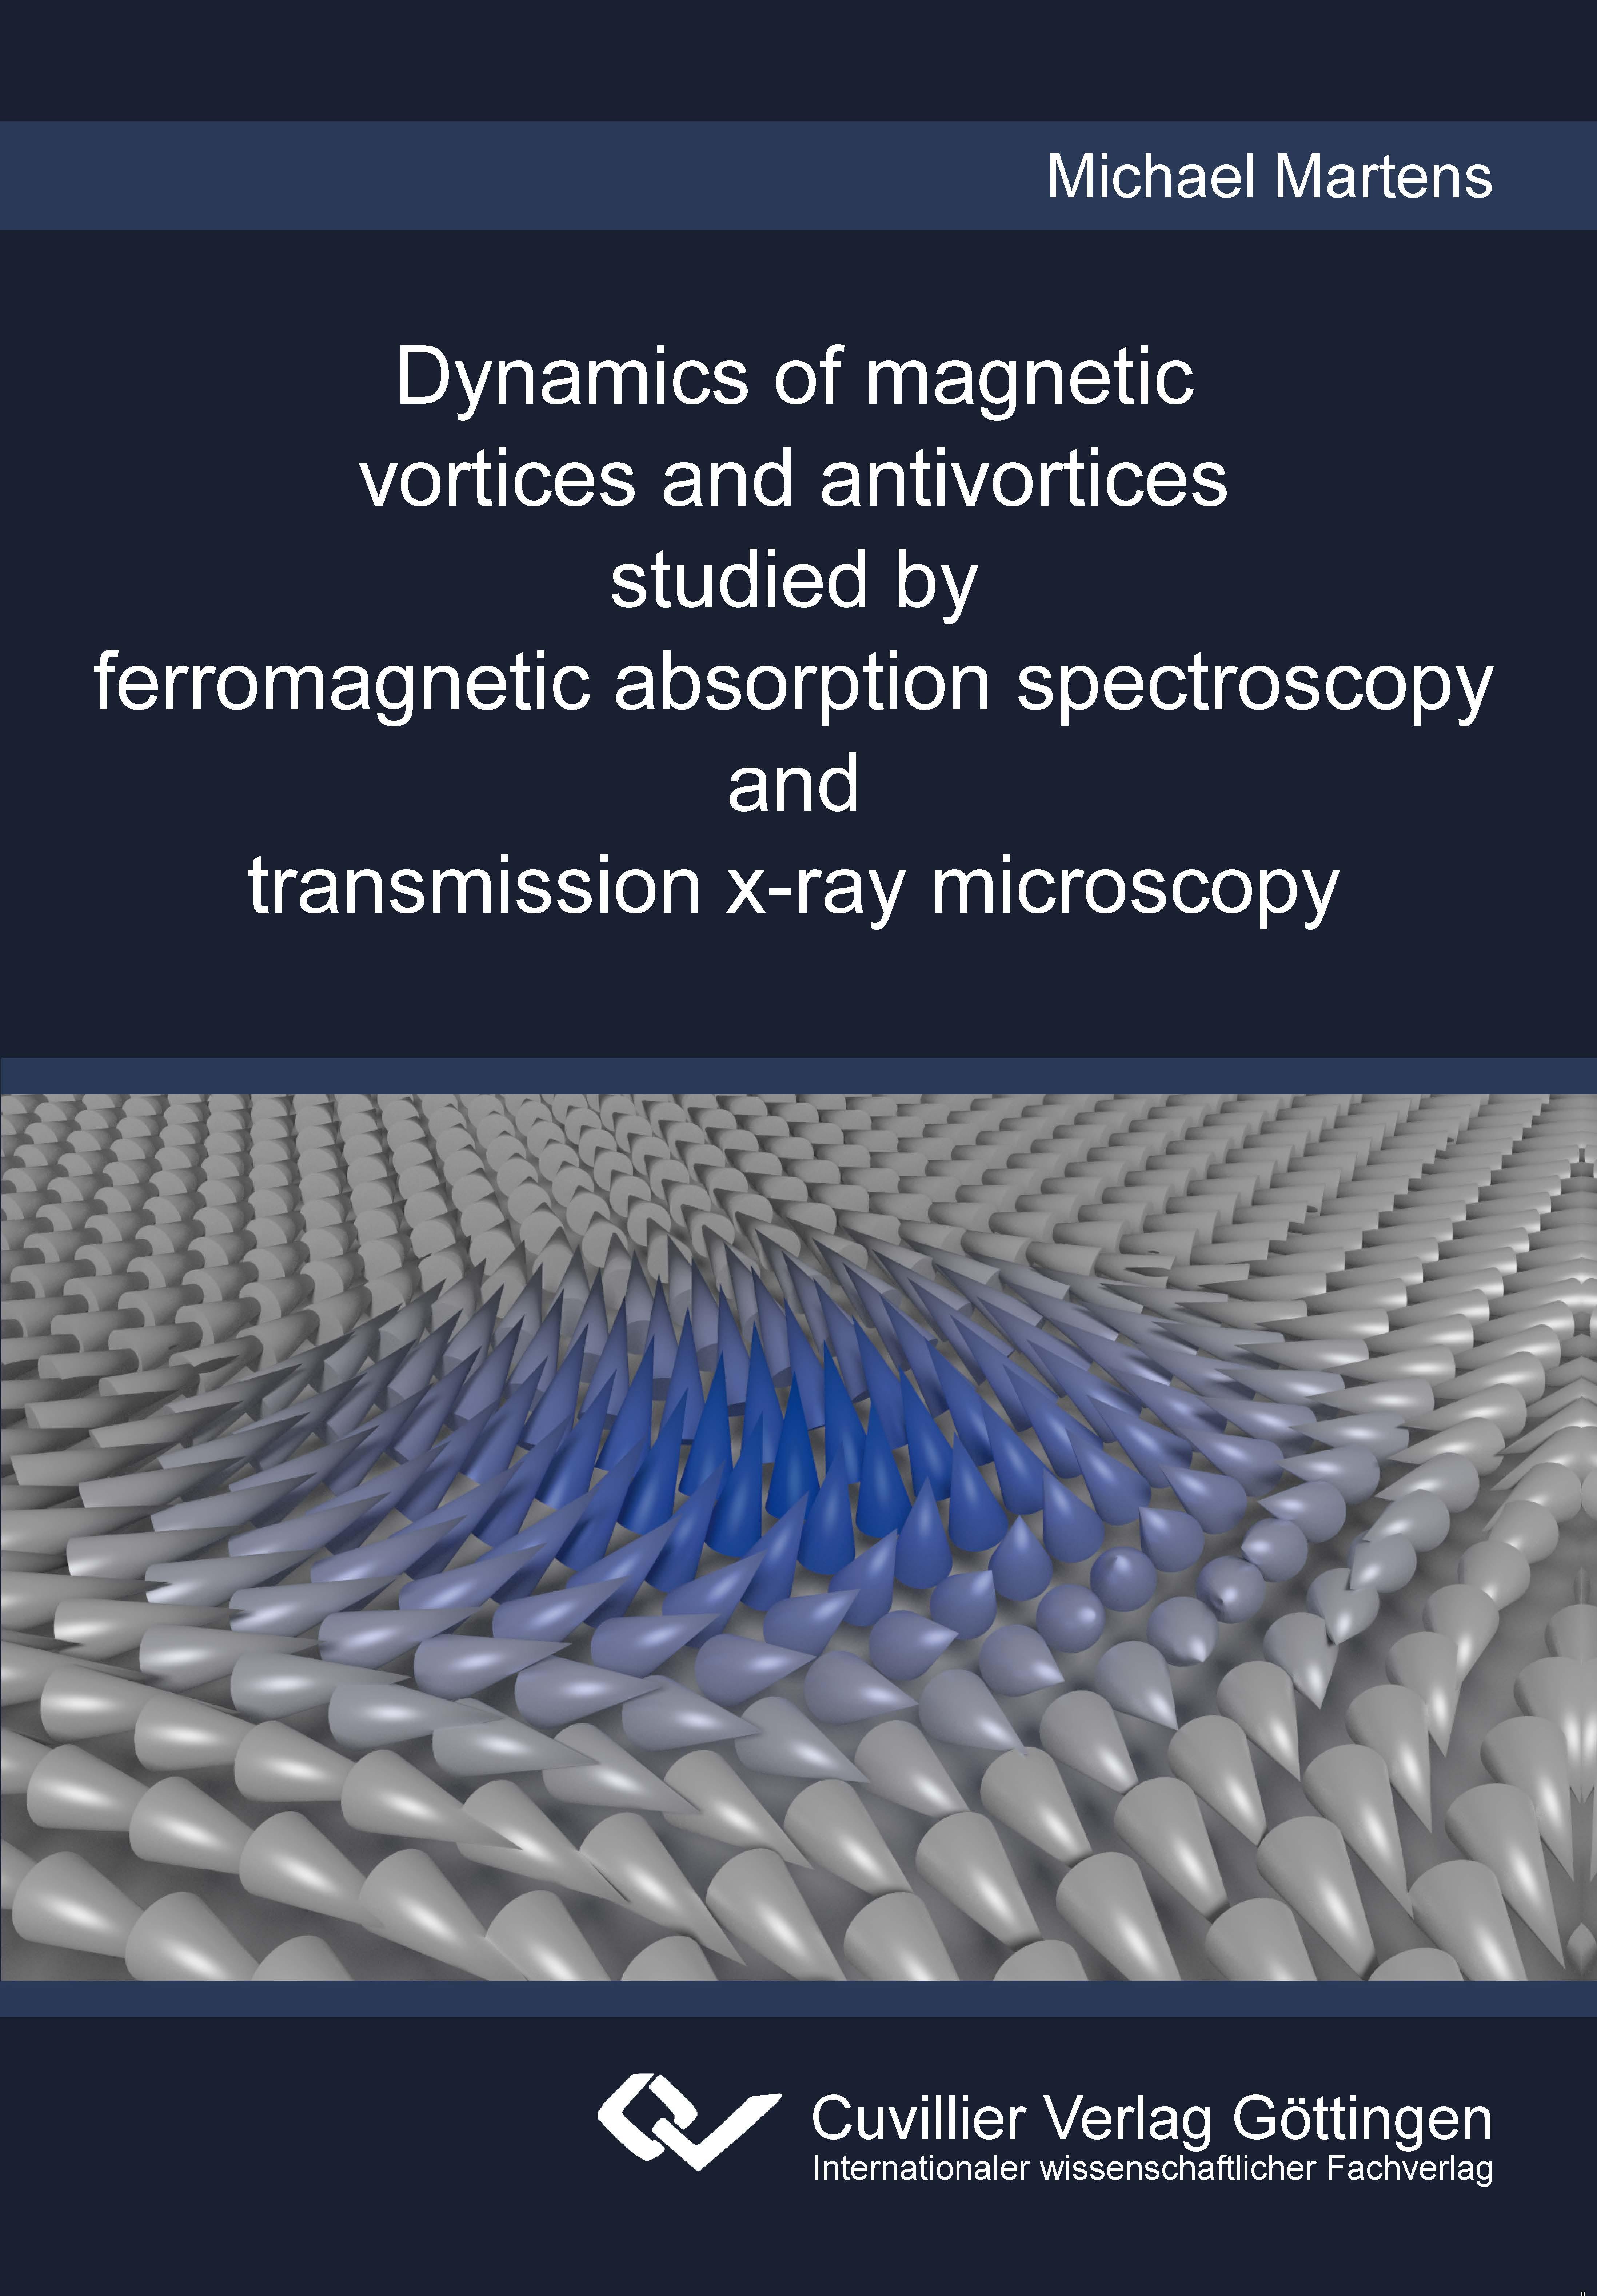 Dynamics of magnetic vortices and antivortices studied by ferromagnetic absorption spectroscopy and transmission x-ray microscopy - Martens, Michael